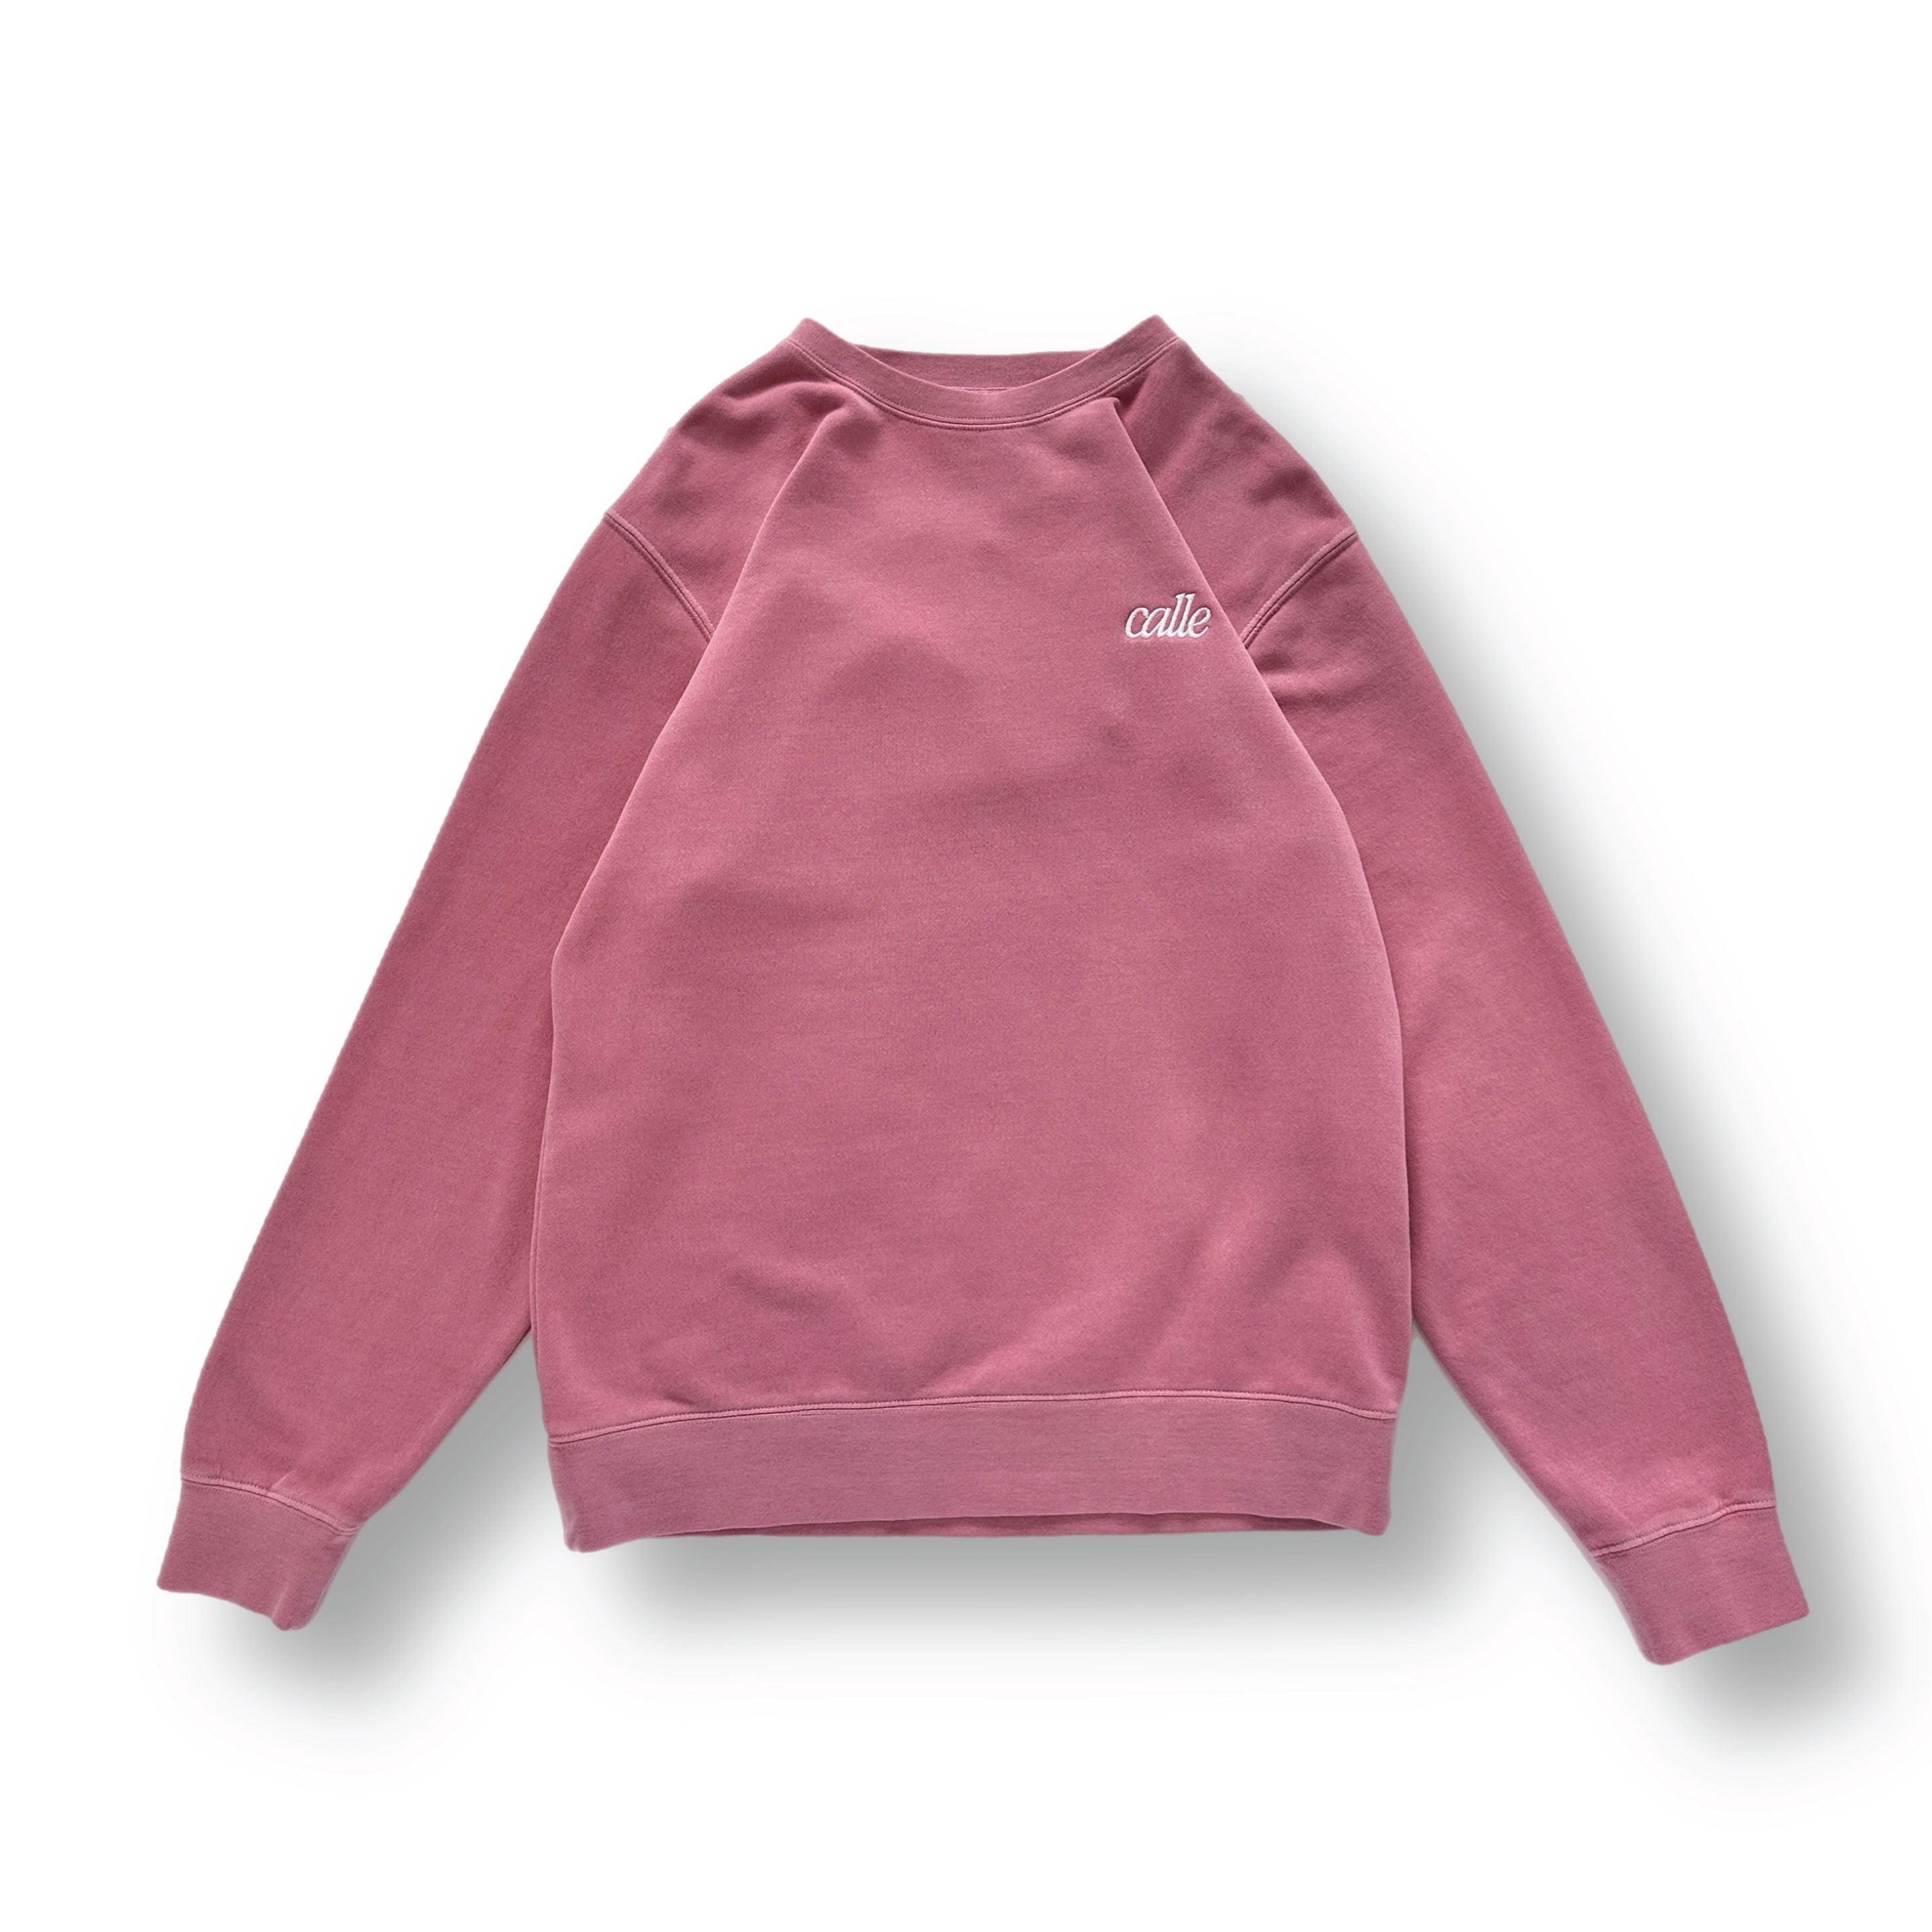 Faded Embroidered Calle Crew - Pink